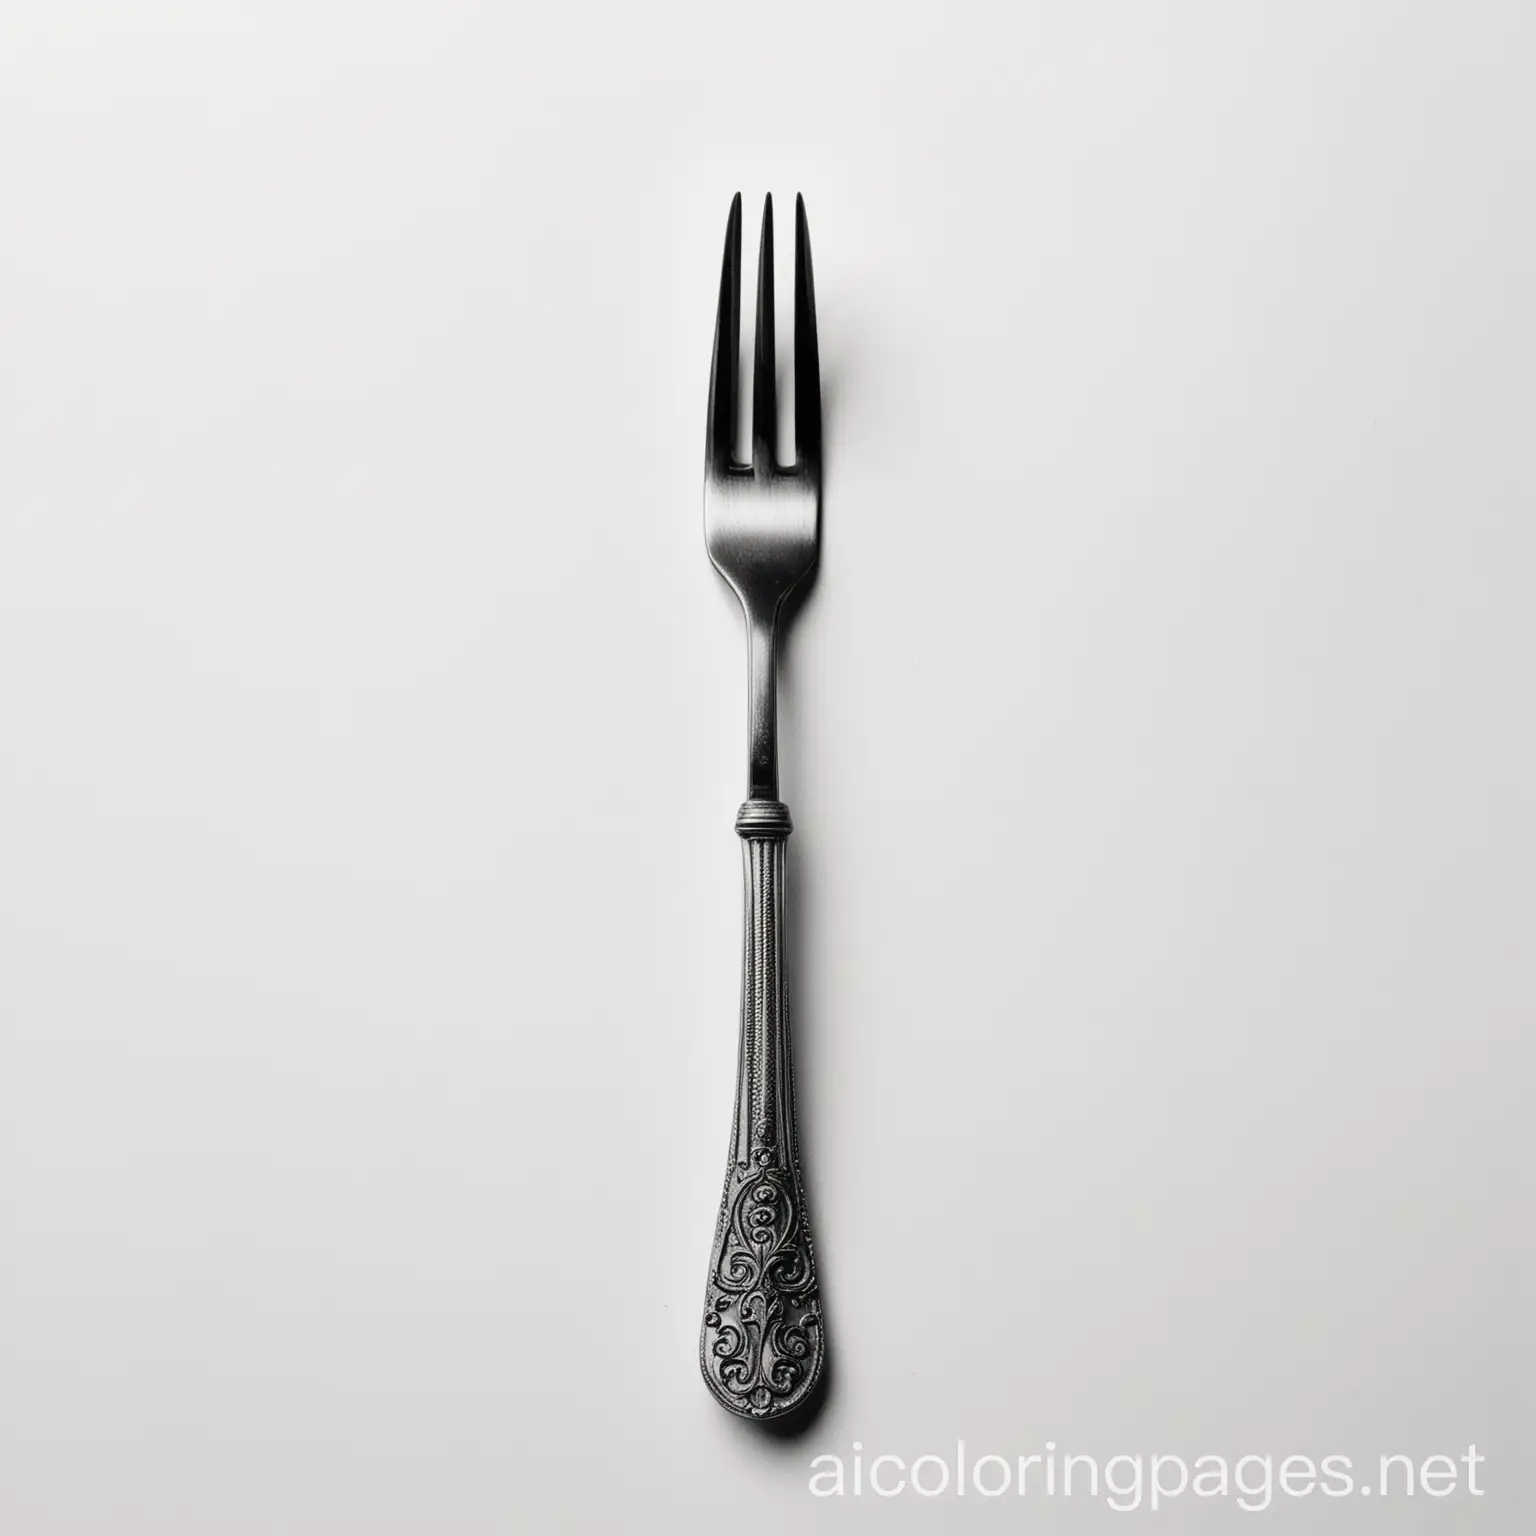 fork, Coloring Page, black and white, line art, white background, Simplicity, Ample White Space. The background of the coloring page is plain white to make it easy for young children to color within the lines. The outlines of all the subjects are easy to distinguish, making it simple for kids to color without too much difficulty